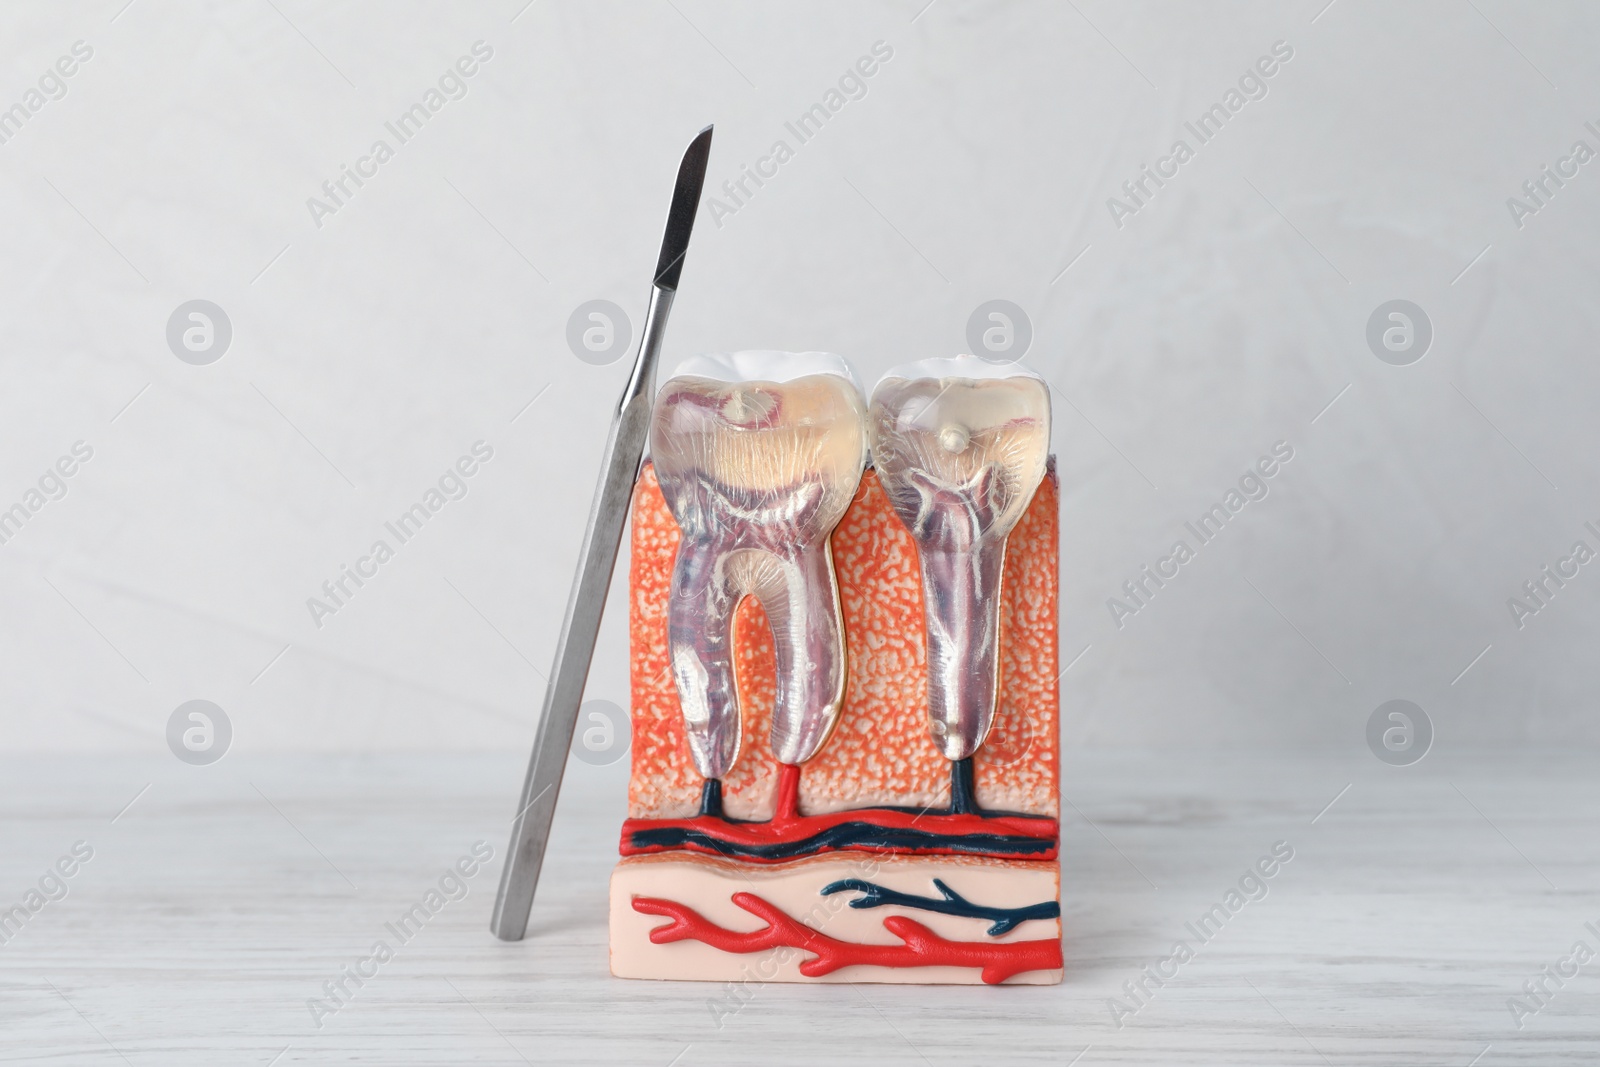 Photo of Model of jaw section with teeth and dental tool on white wooden table